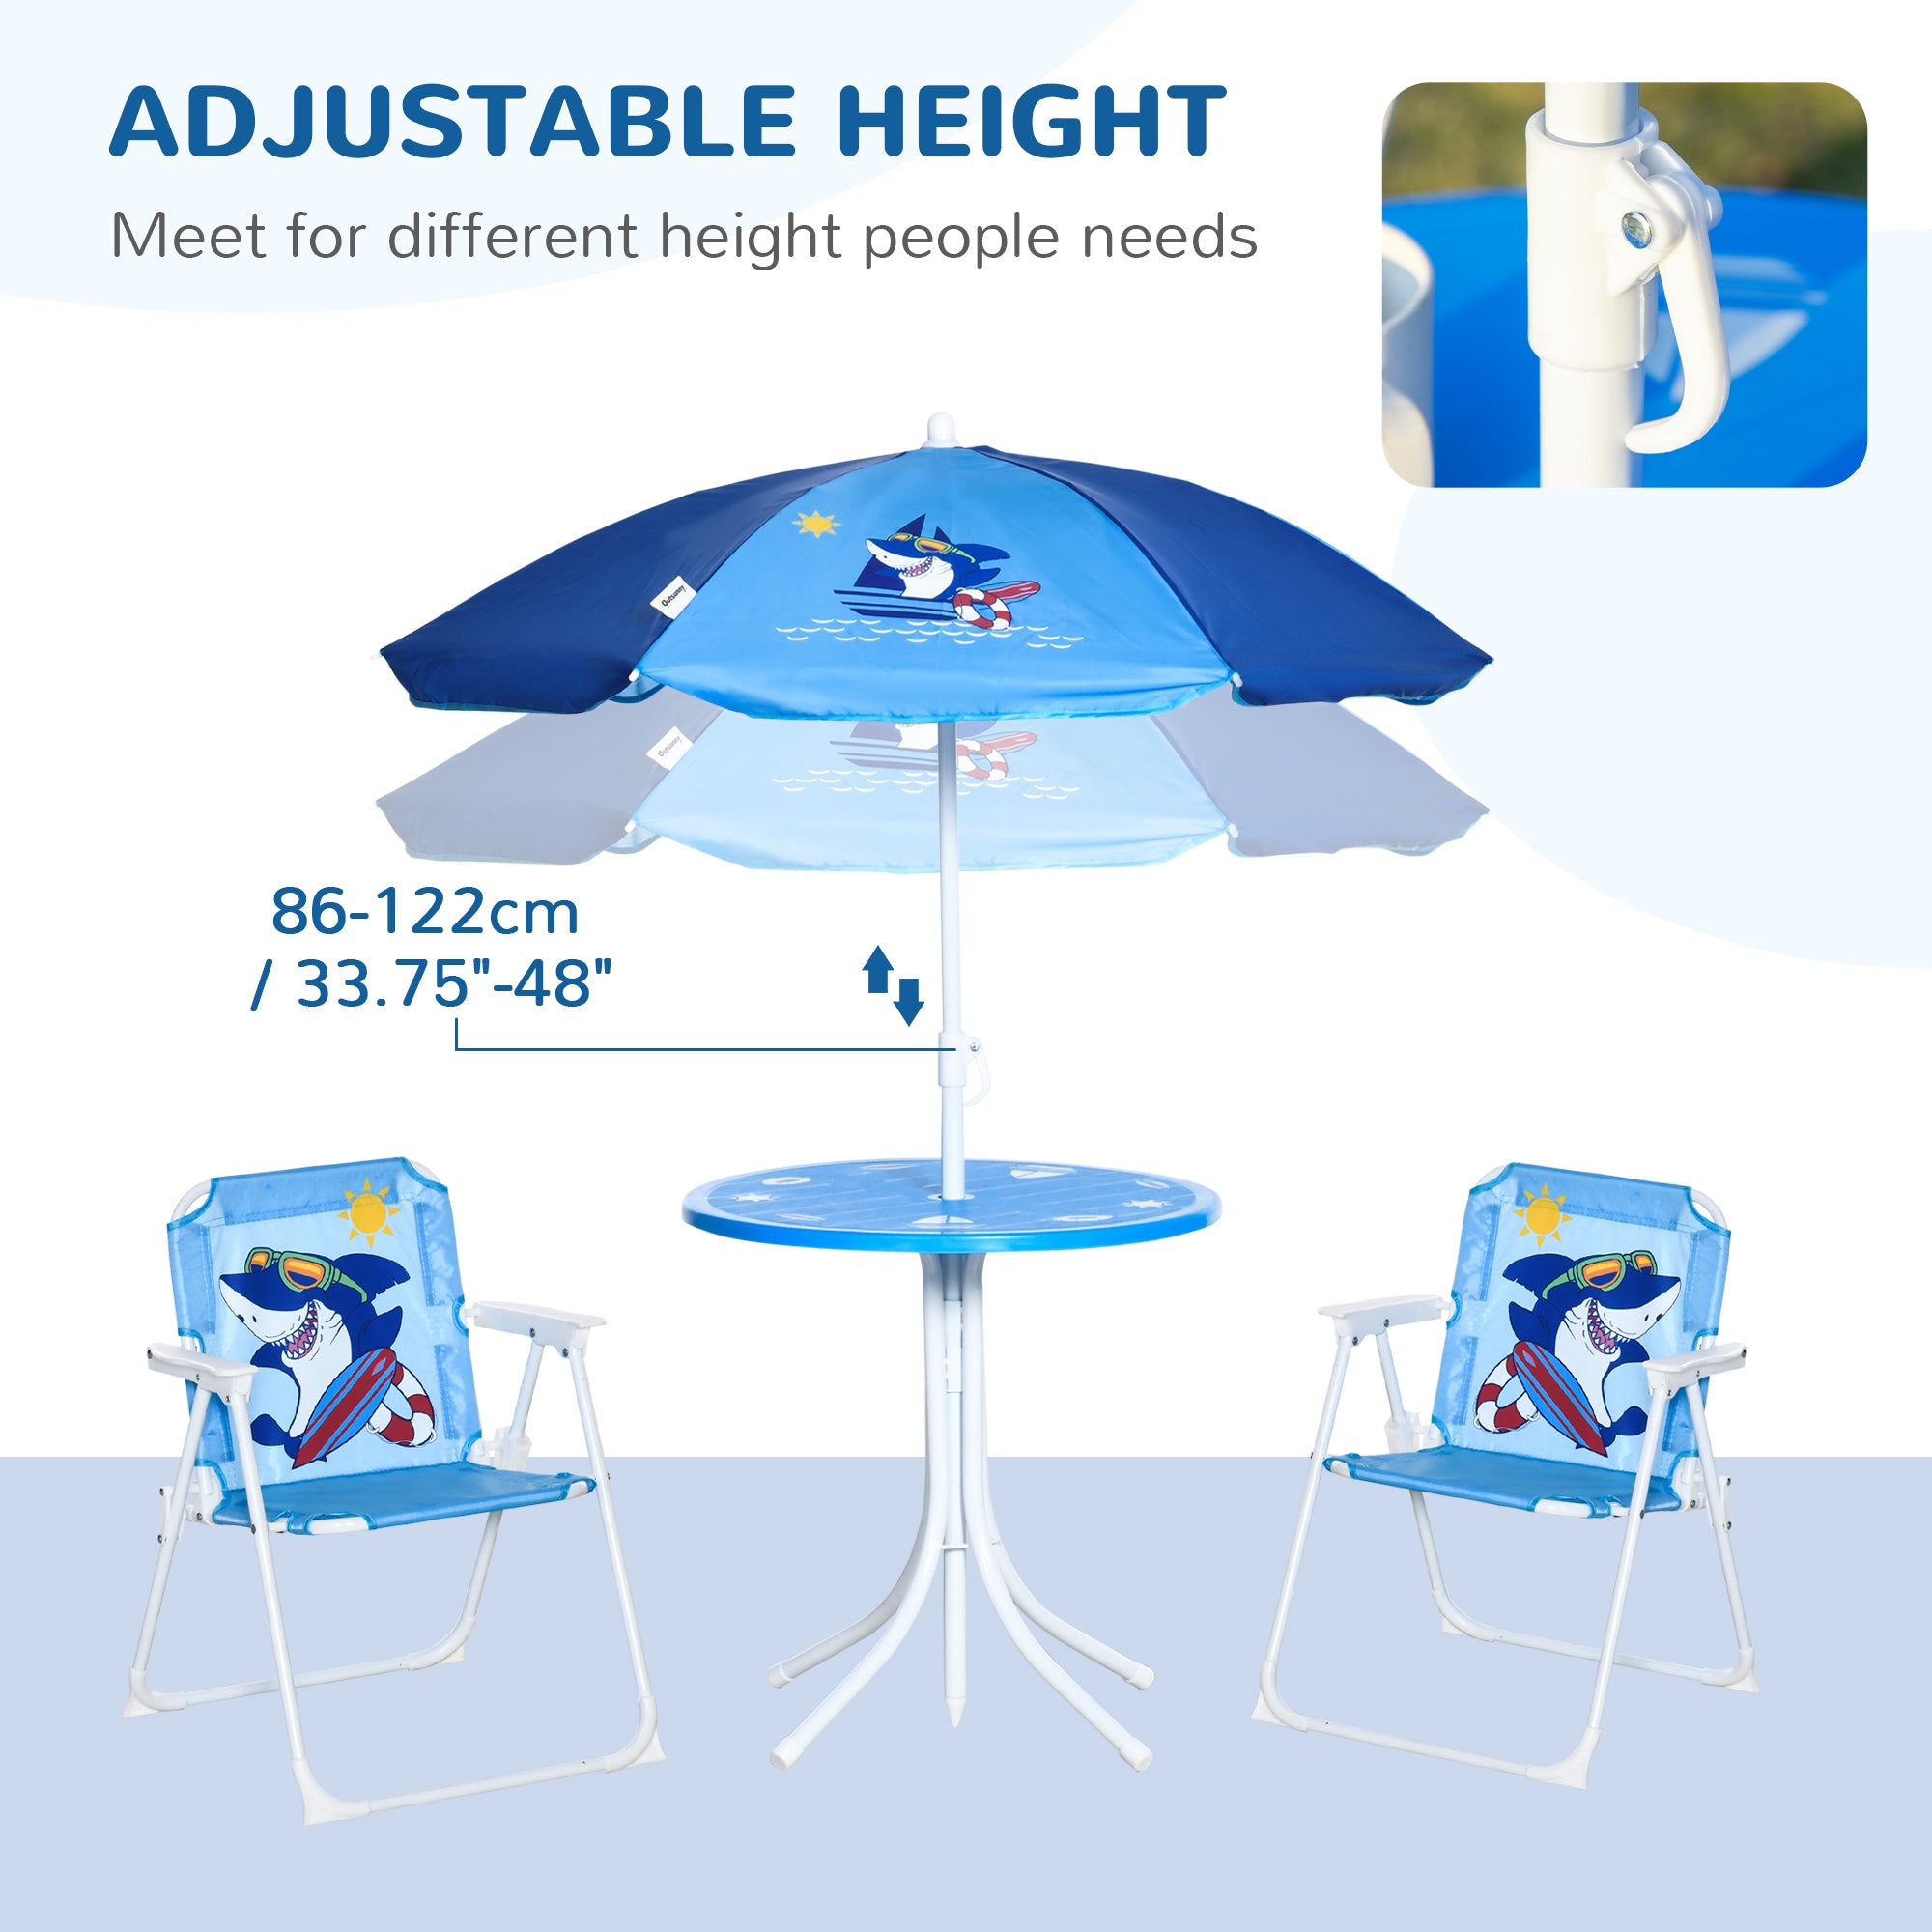 Outsunny Kids Picnic & Table Chair set, Outdoor Folding Garden Furniture w/ Shark Design, Removable, Adjustable Sun Umbrella, Ages 3-6 Years - Blue - Inspirely